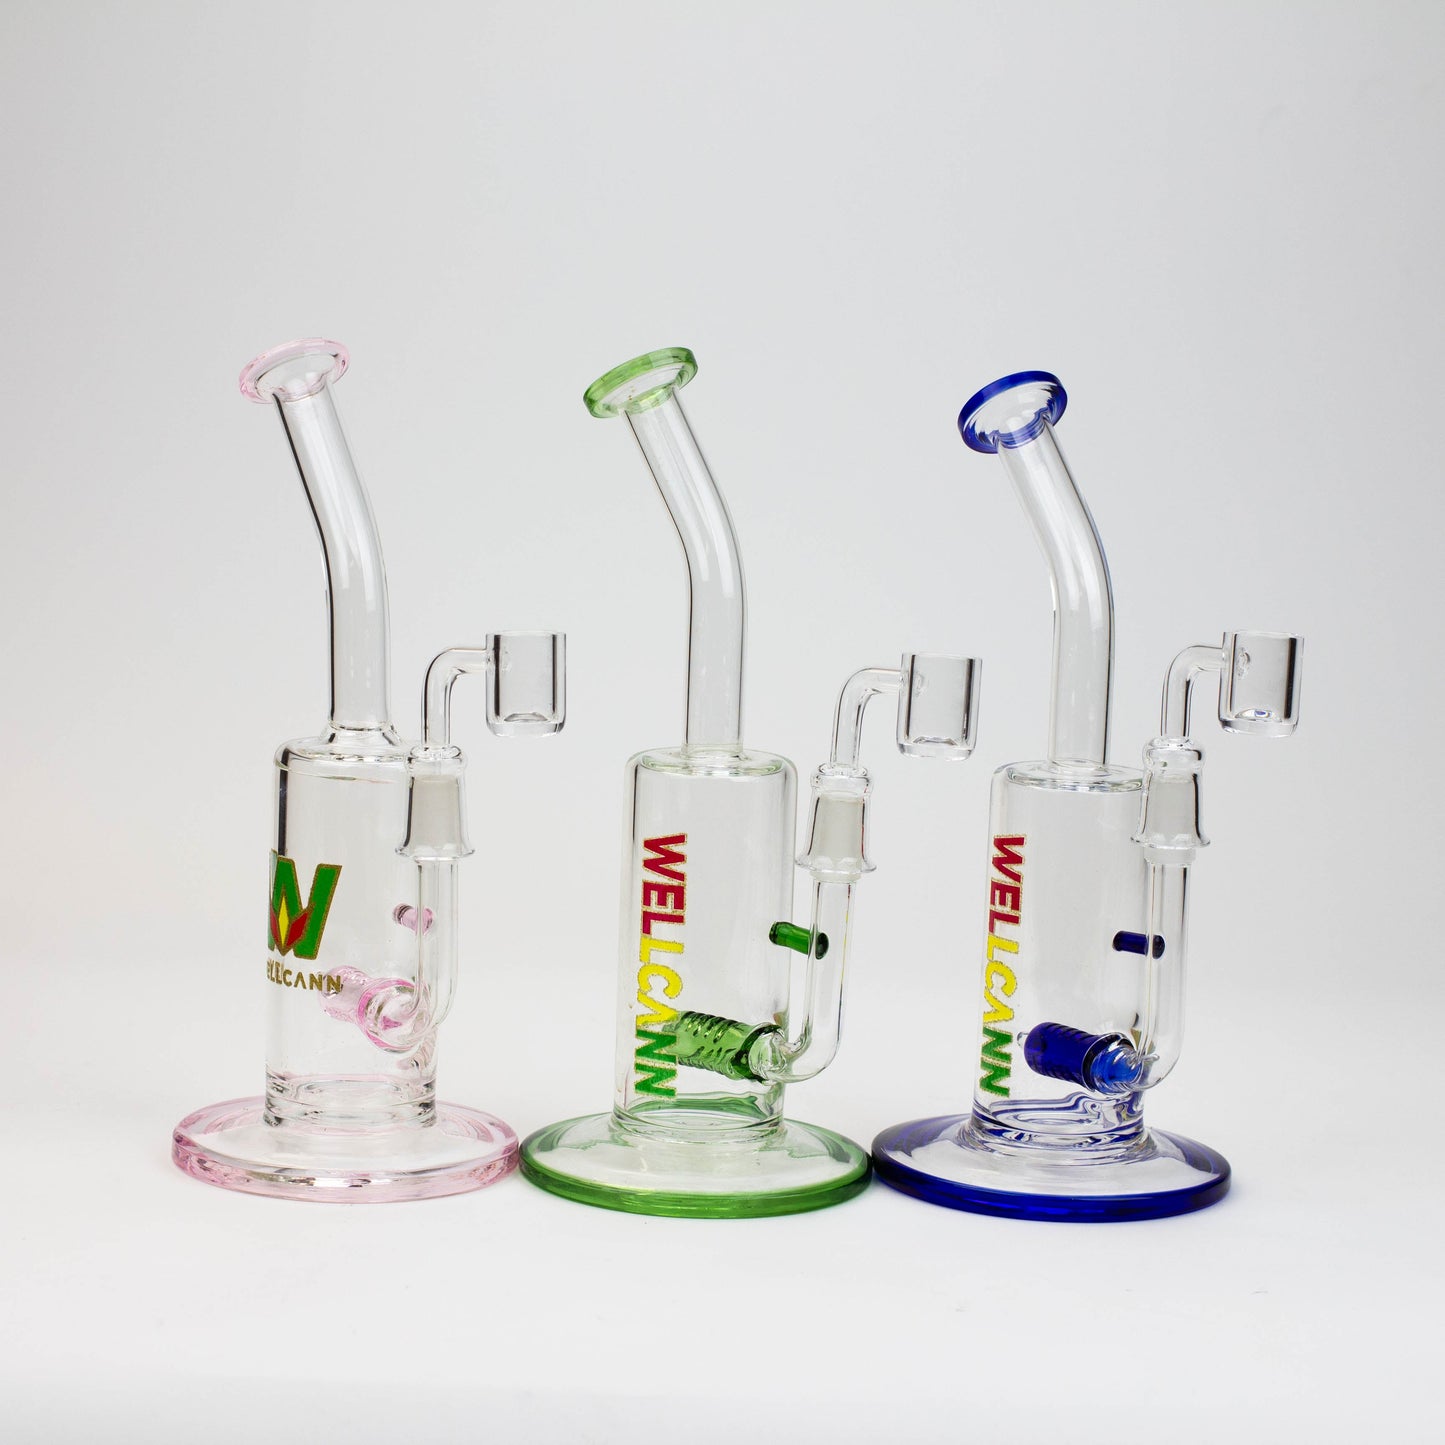 9" WellCann Inline diffuser Rig with Banger_0